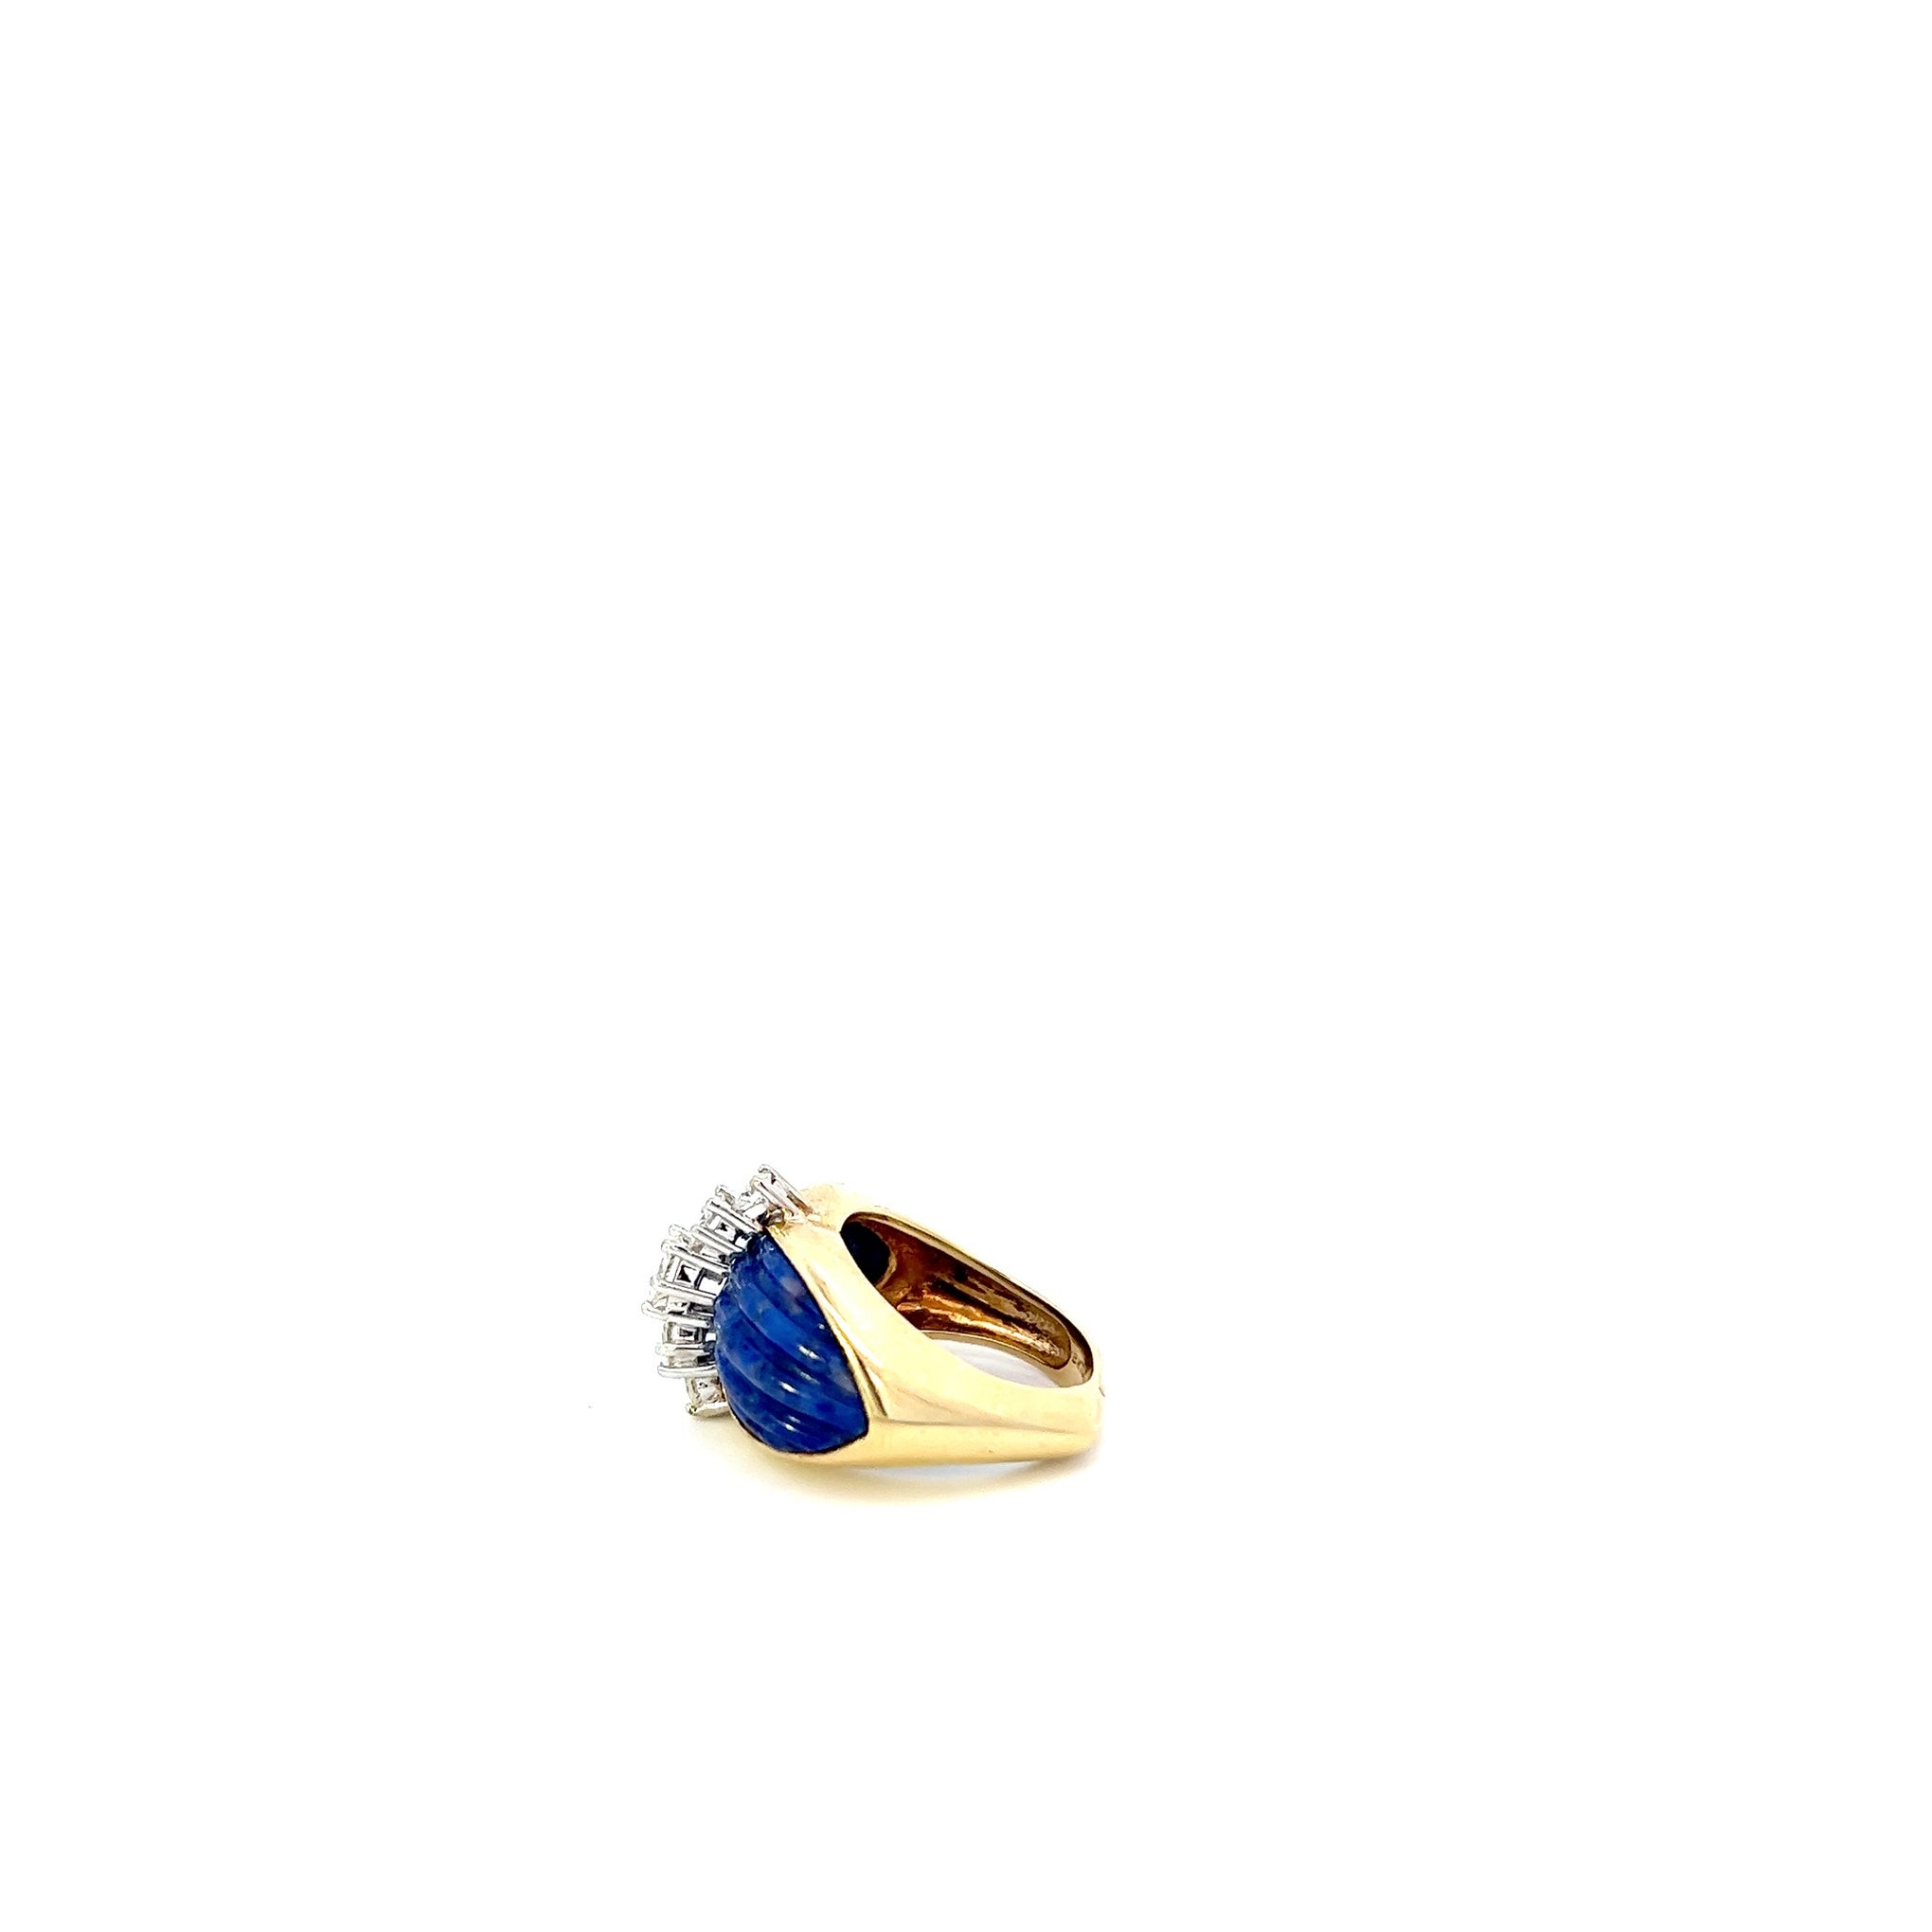 VINTAGE 18KT YELLOW GOLD, ROUND CUT DIAMOND AND LAPIS RING